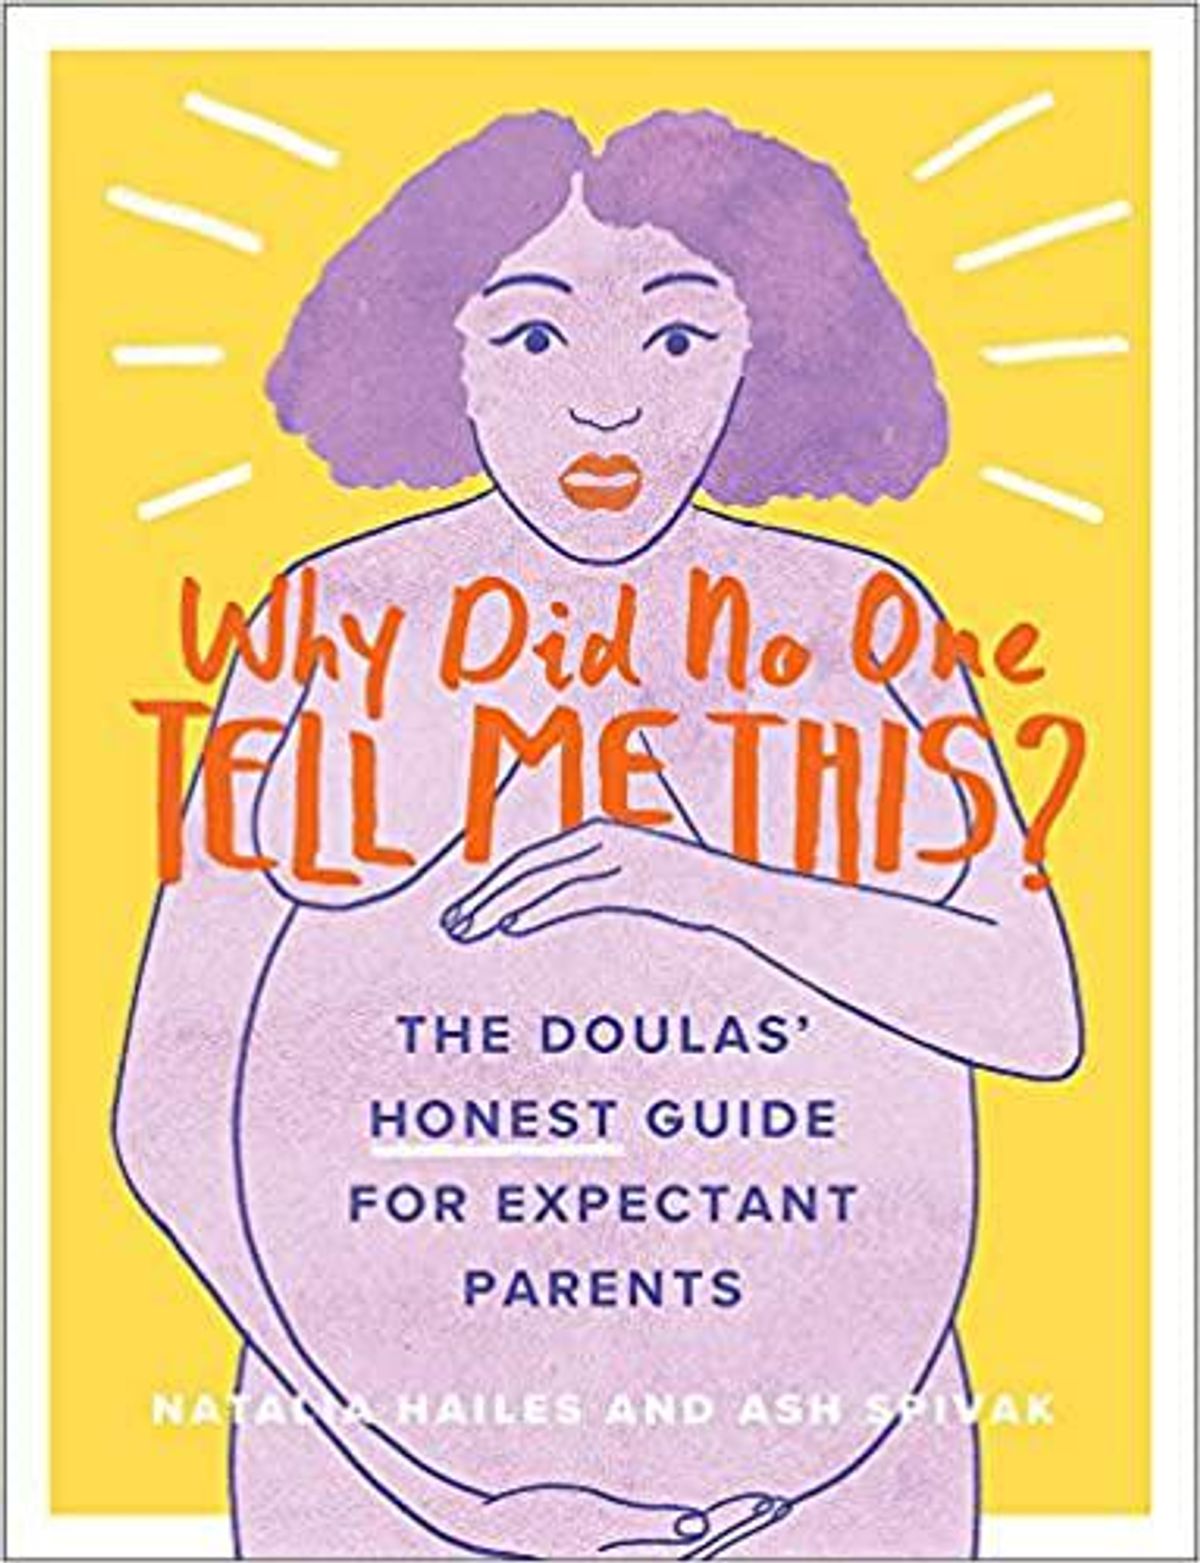 natalia hailes why did no one tell me this the doulas honest guide for expectant parents